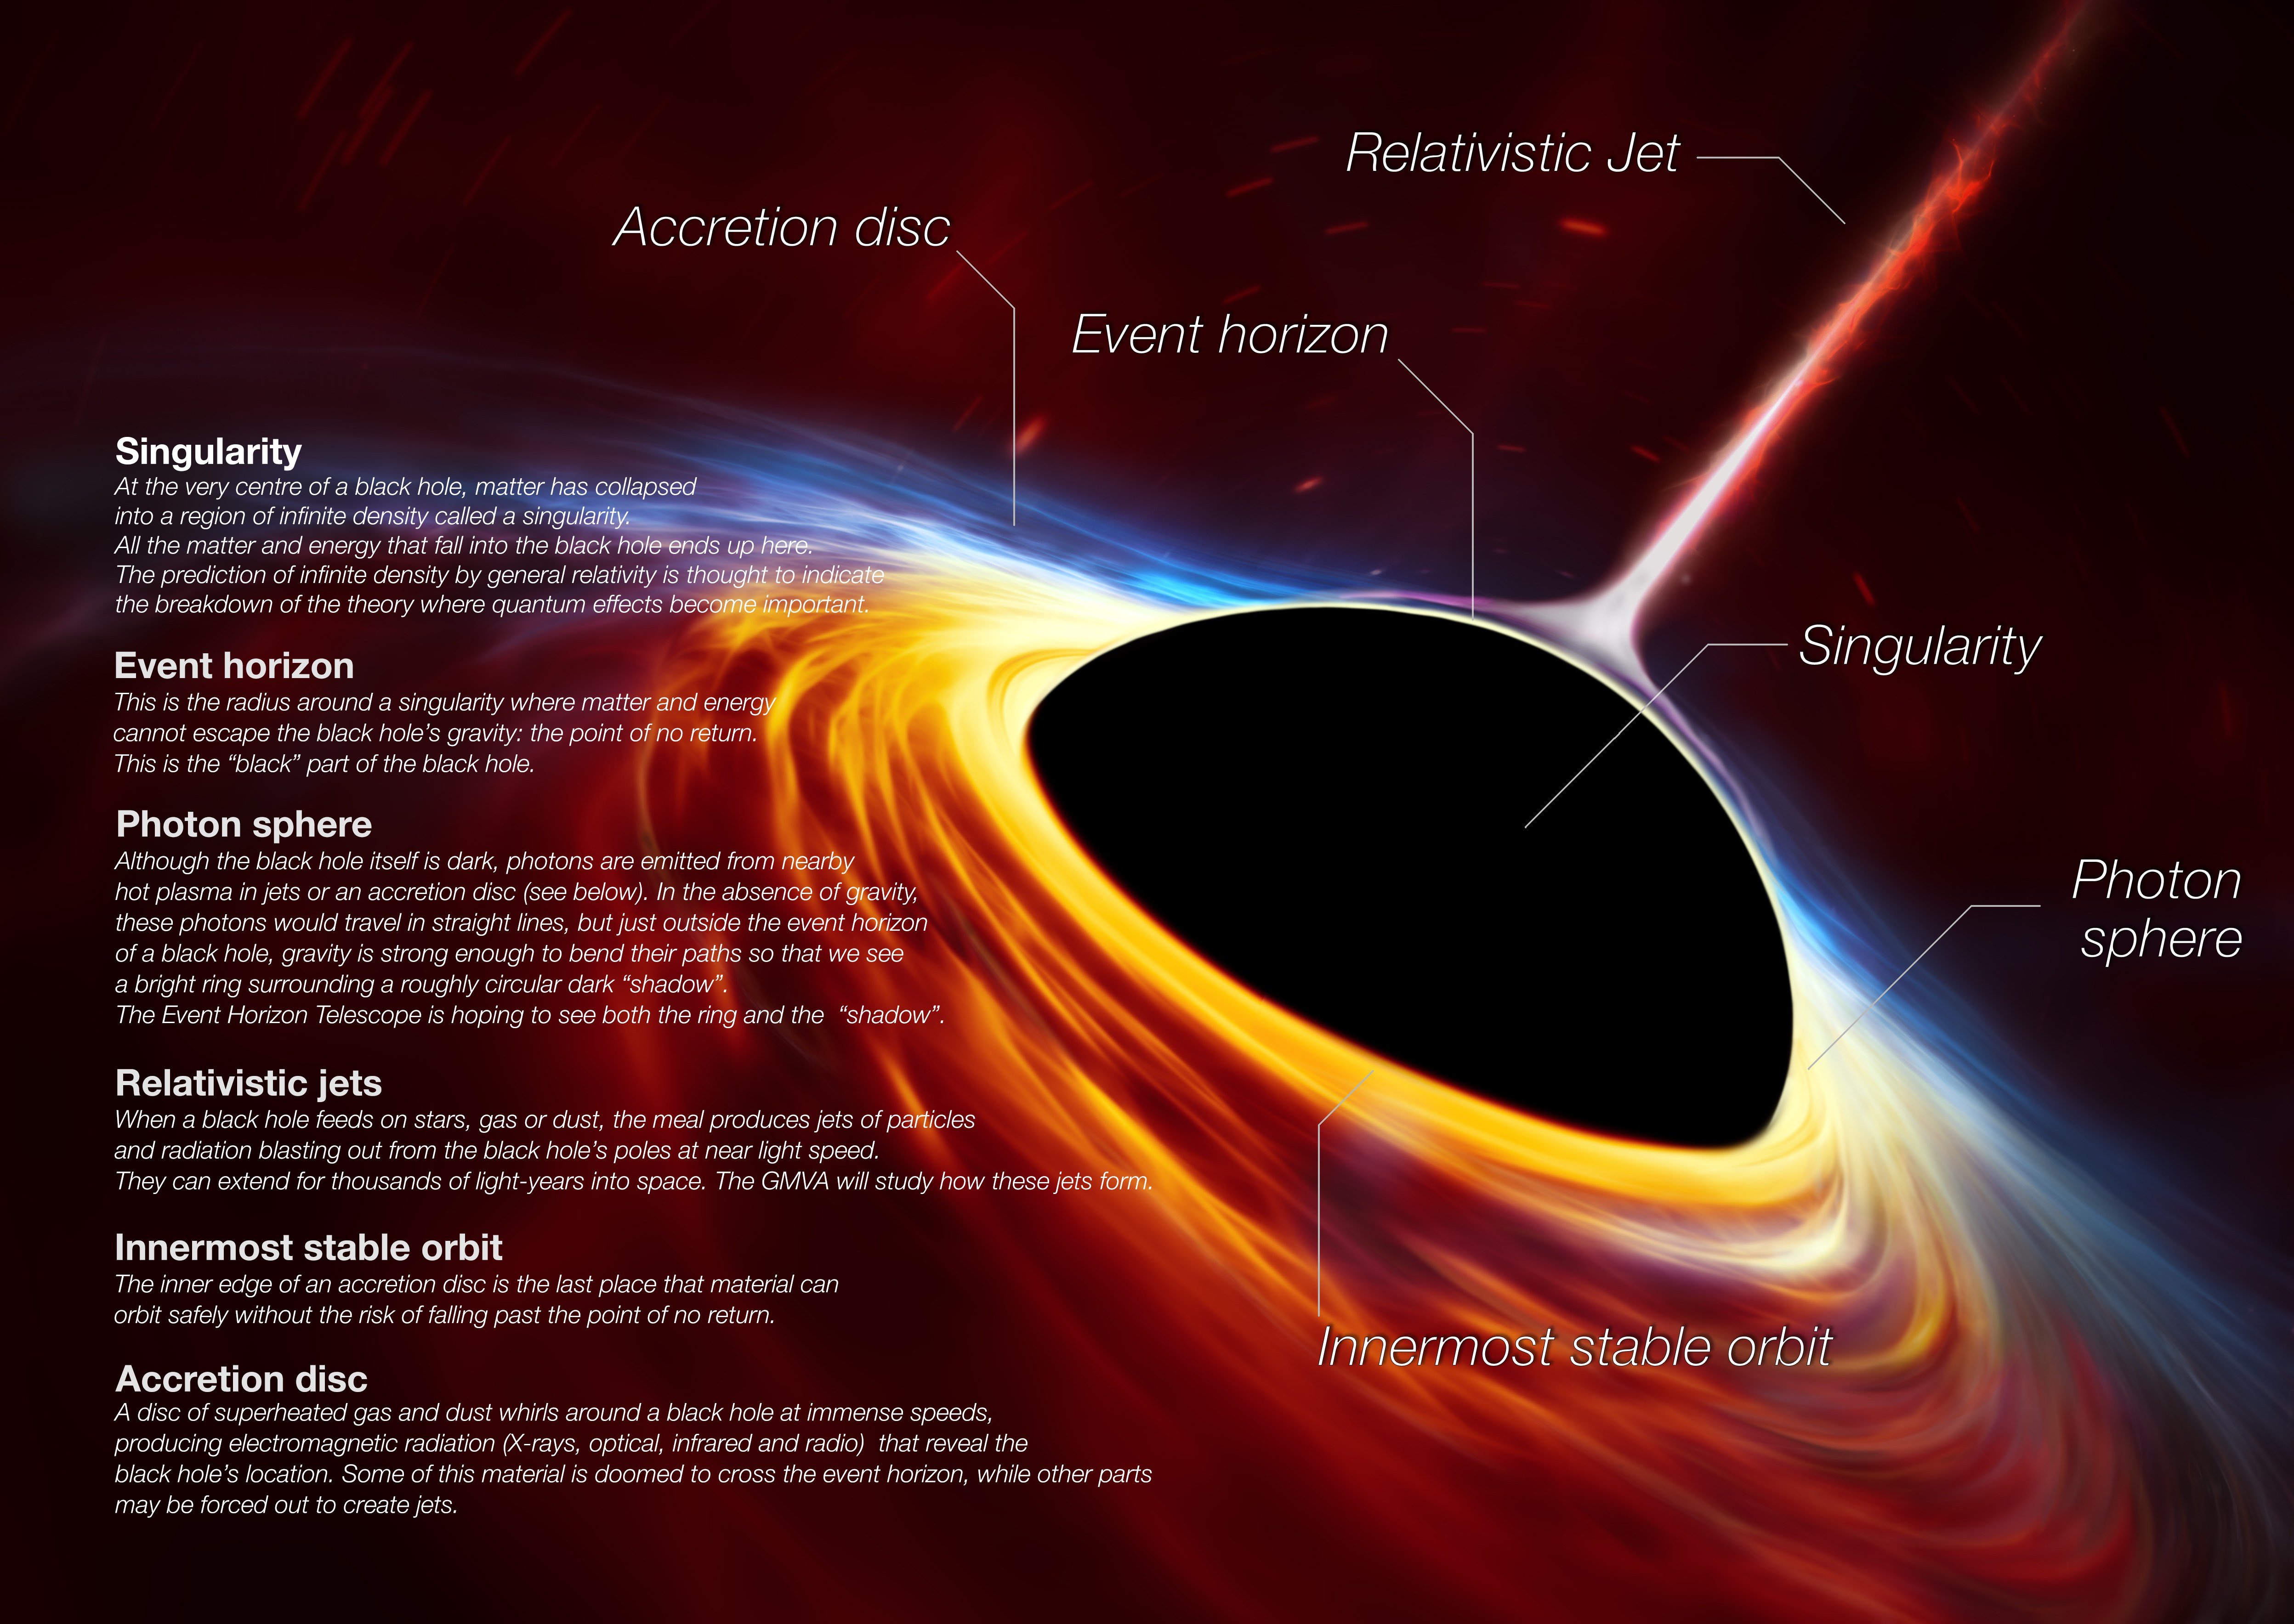 How to Escape a Black Hole Understanding the Event Horizon, Photon